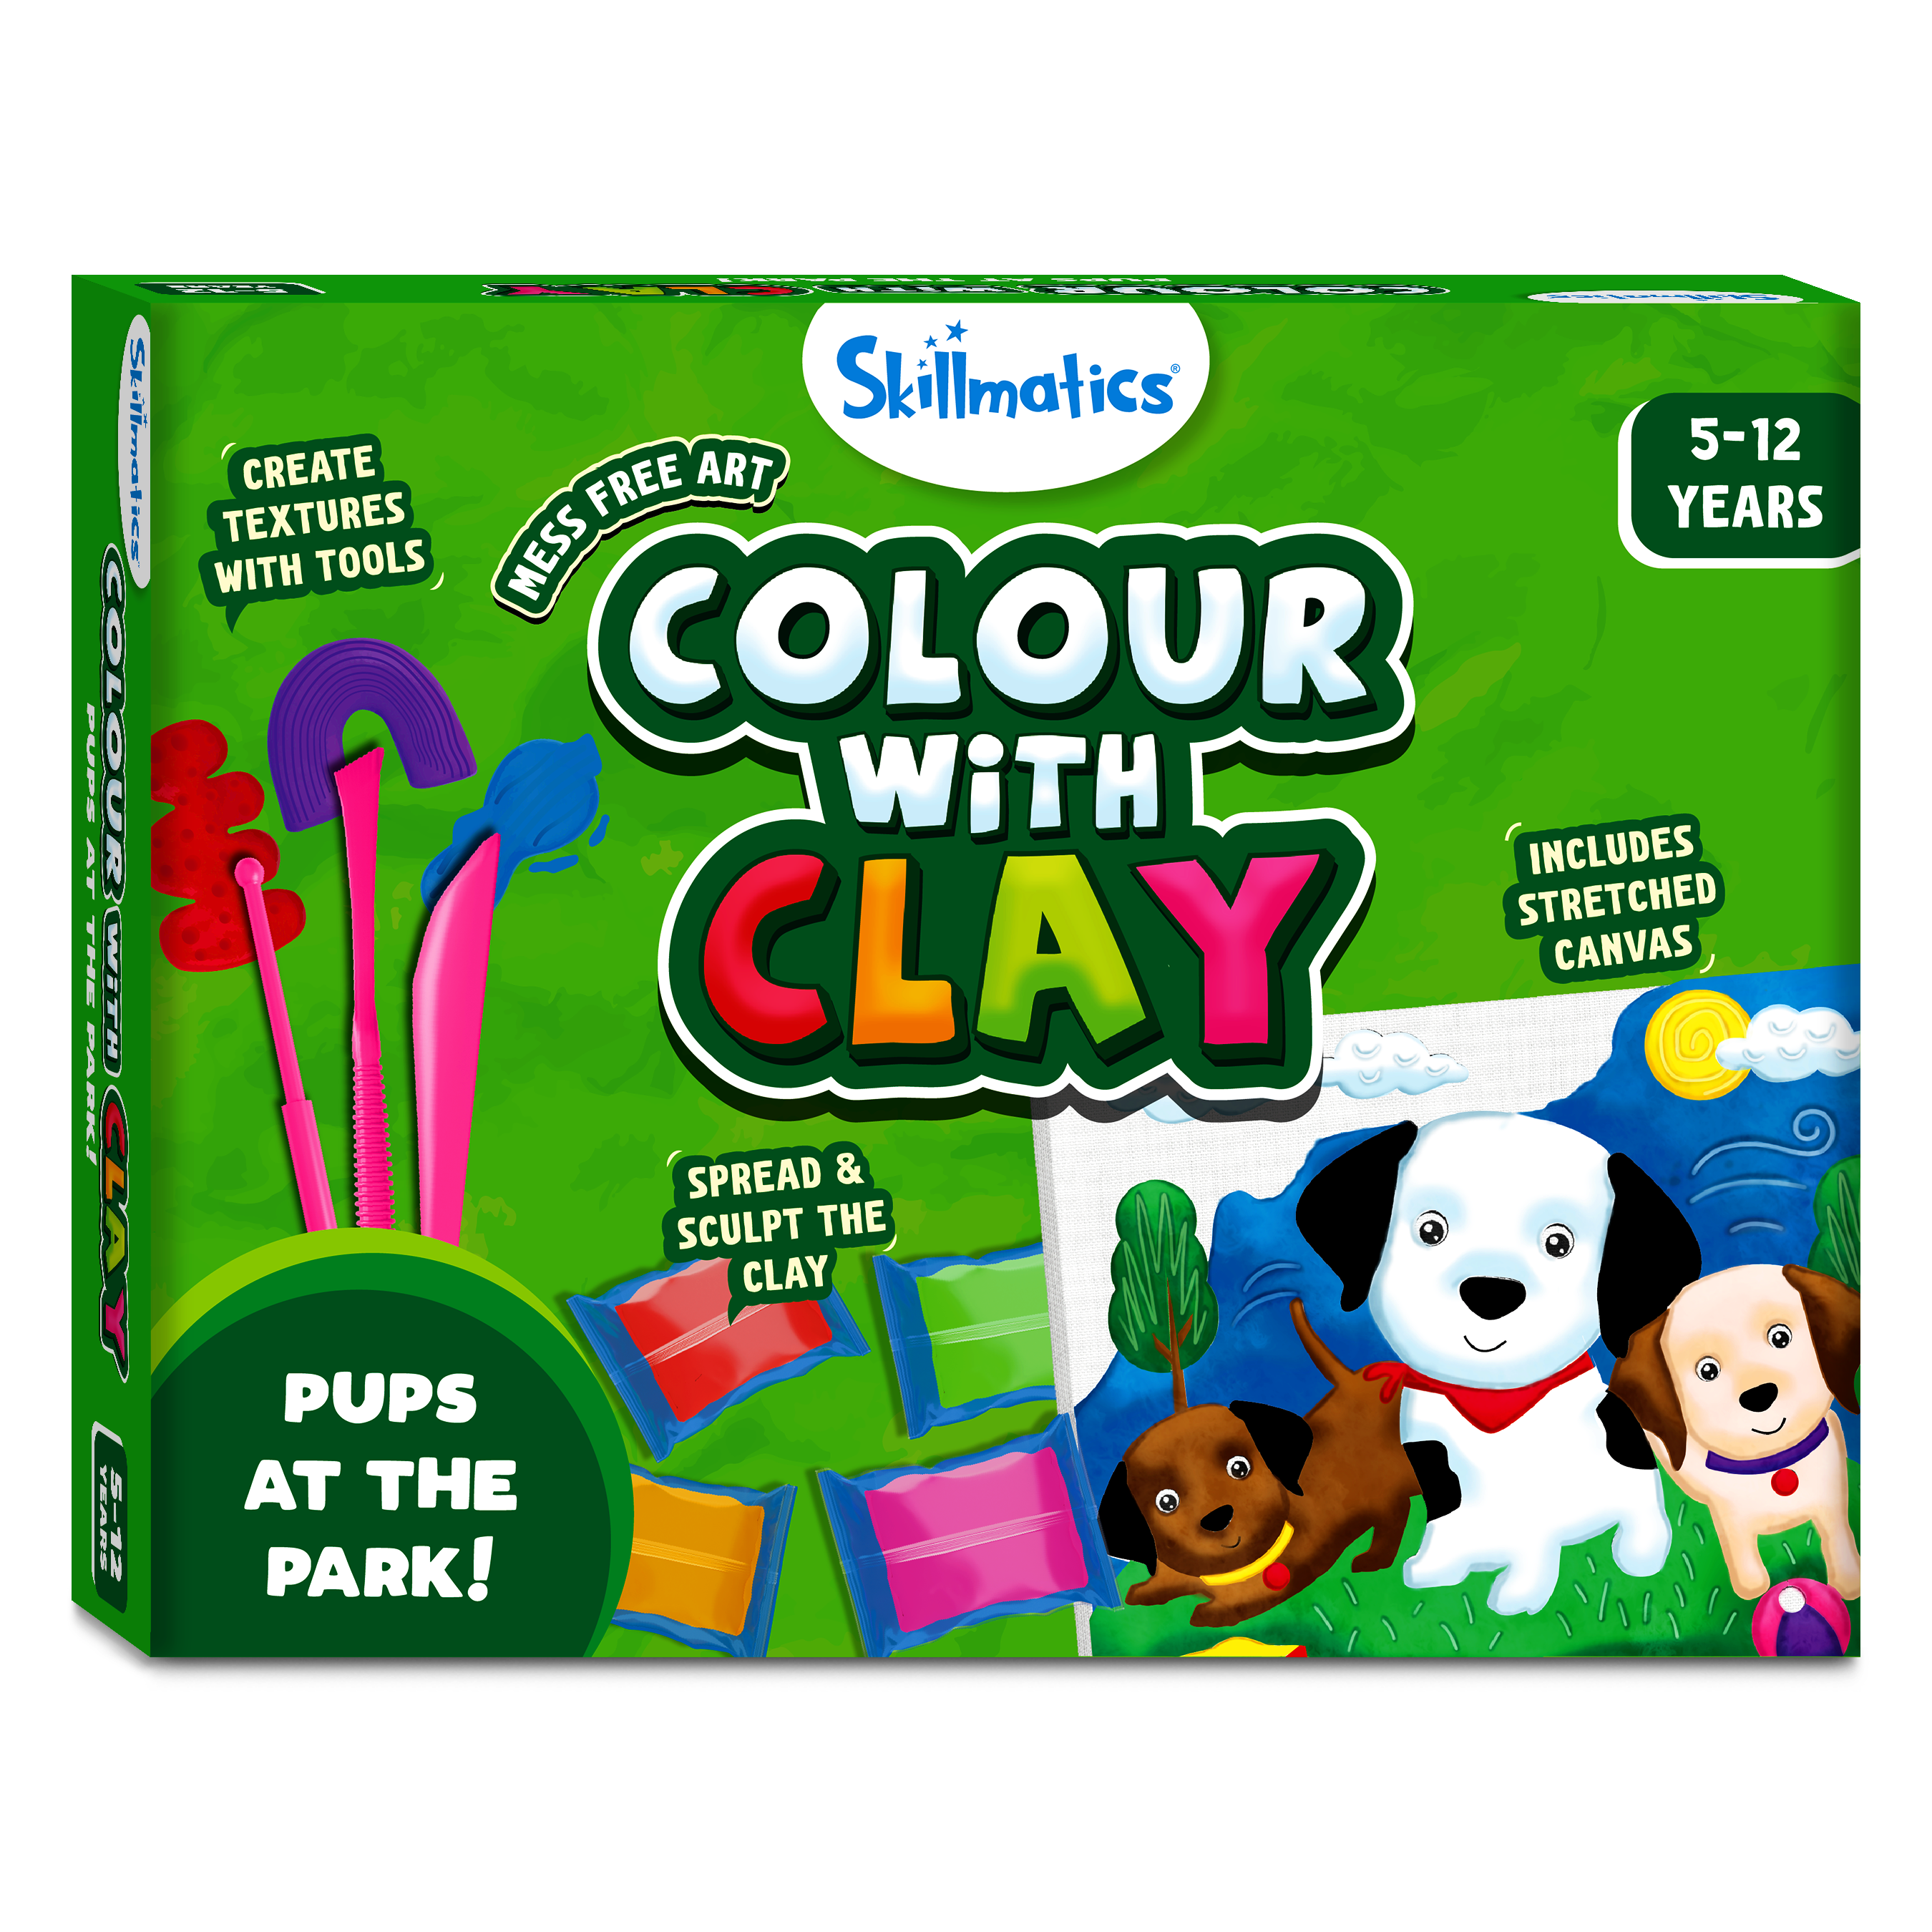 Skillmatics Art & Craft Kit - Colour with Clay, No Mess Art, Create a Clay Canvas Of Pups at The Park, Gifts for Ages 5 to 12